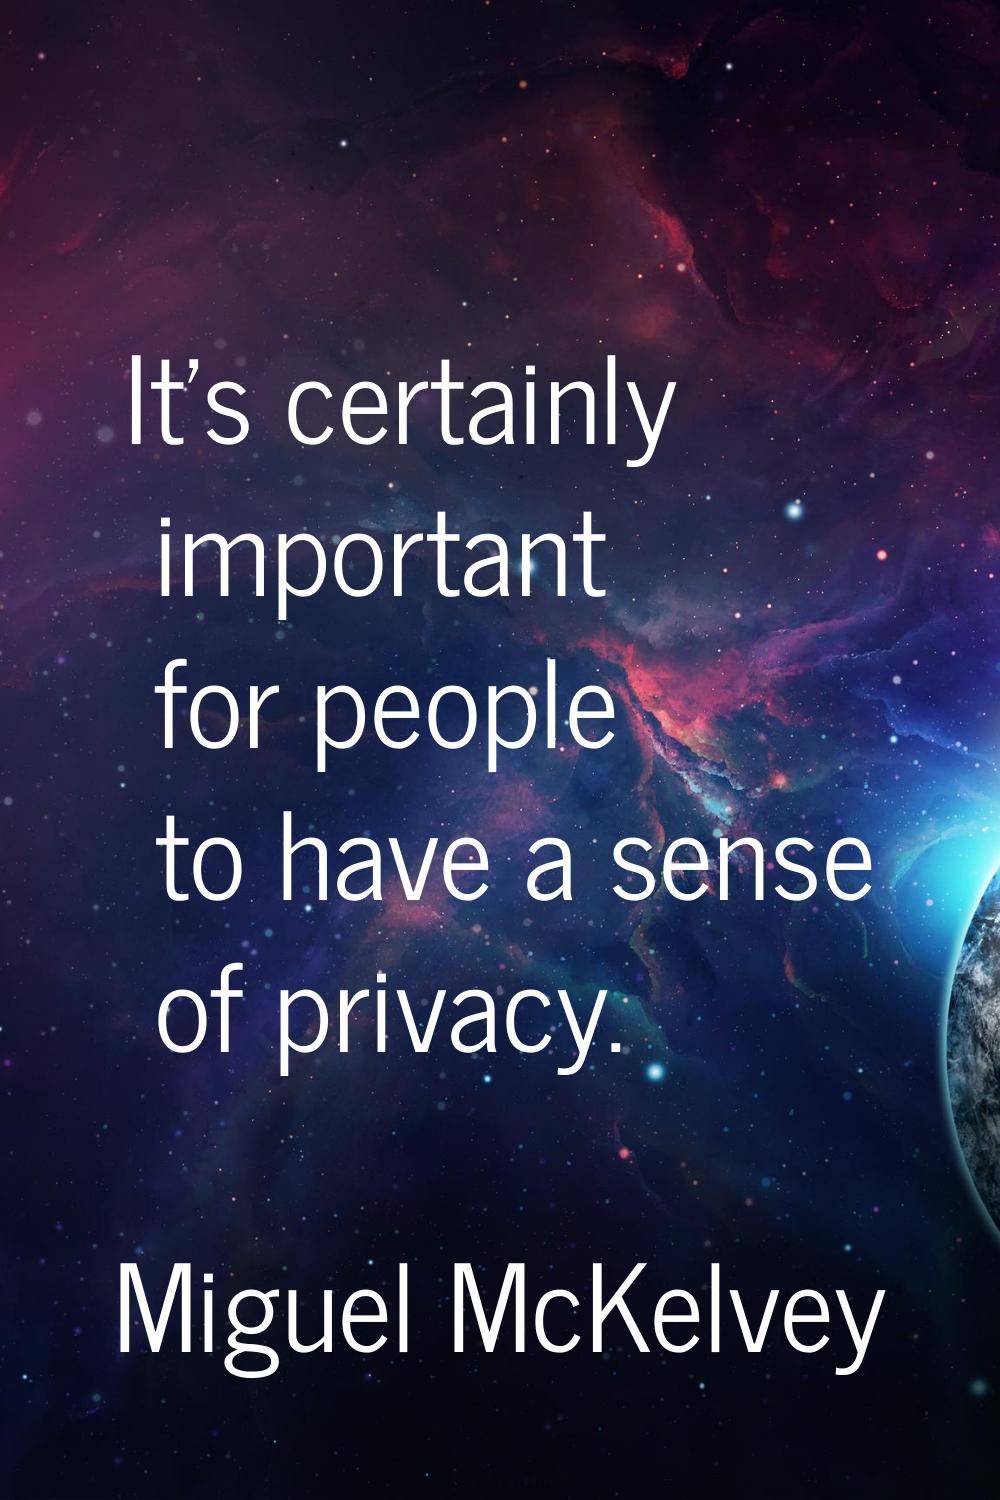 It's certainly important for people to have a sense of privacy.